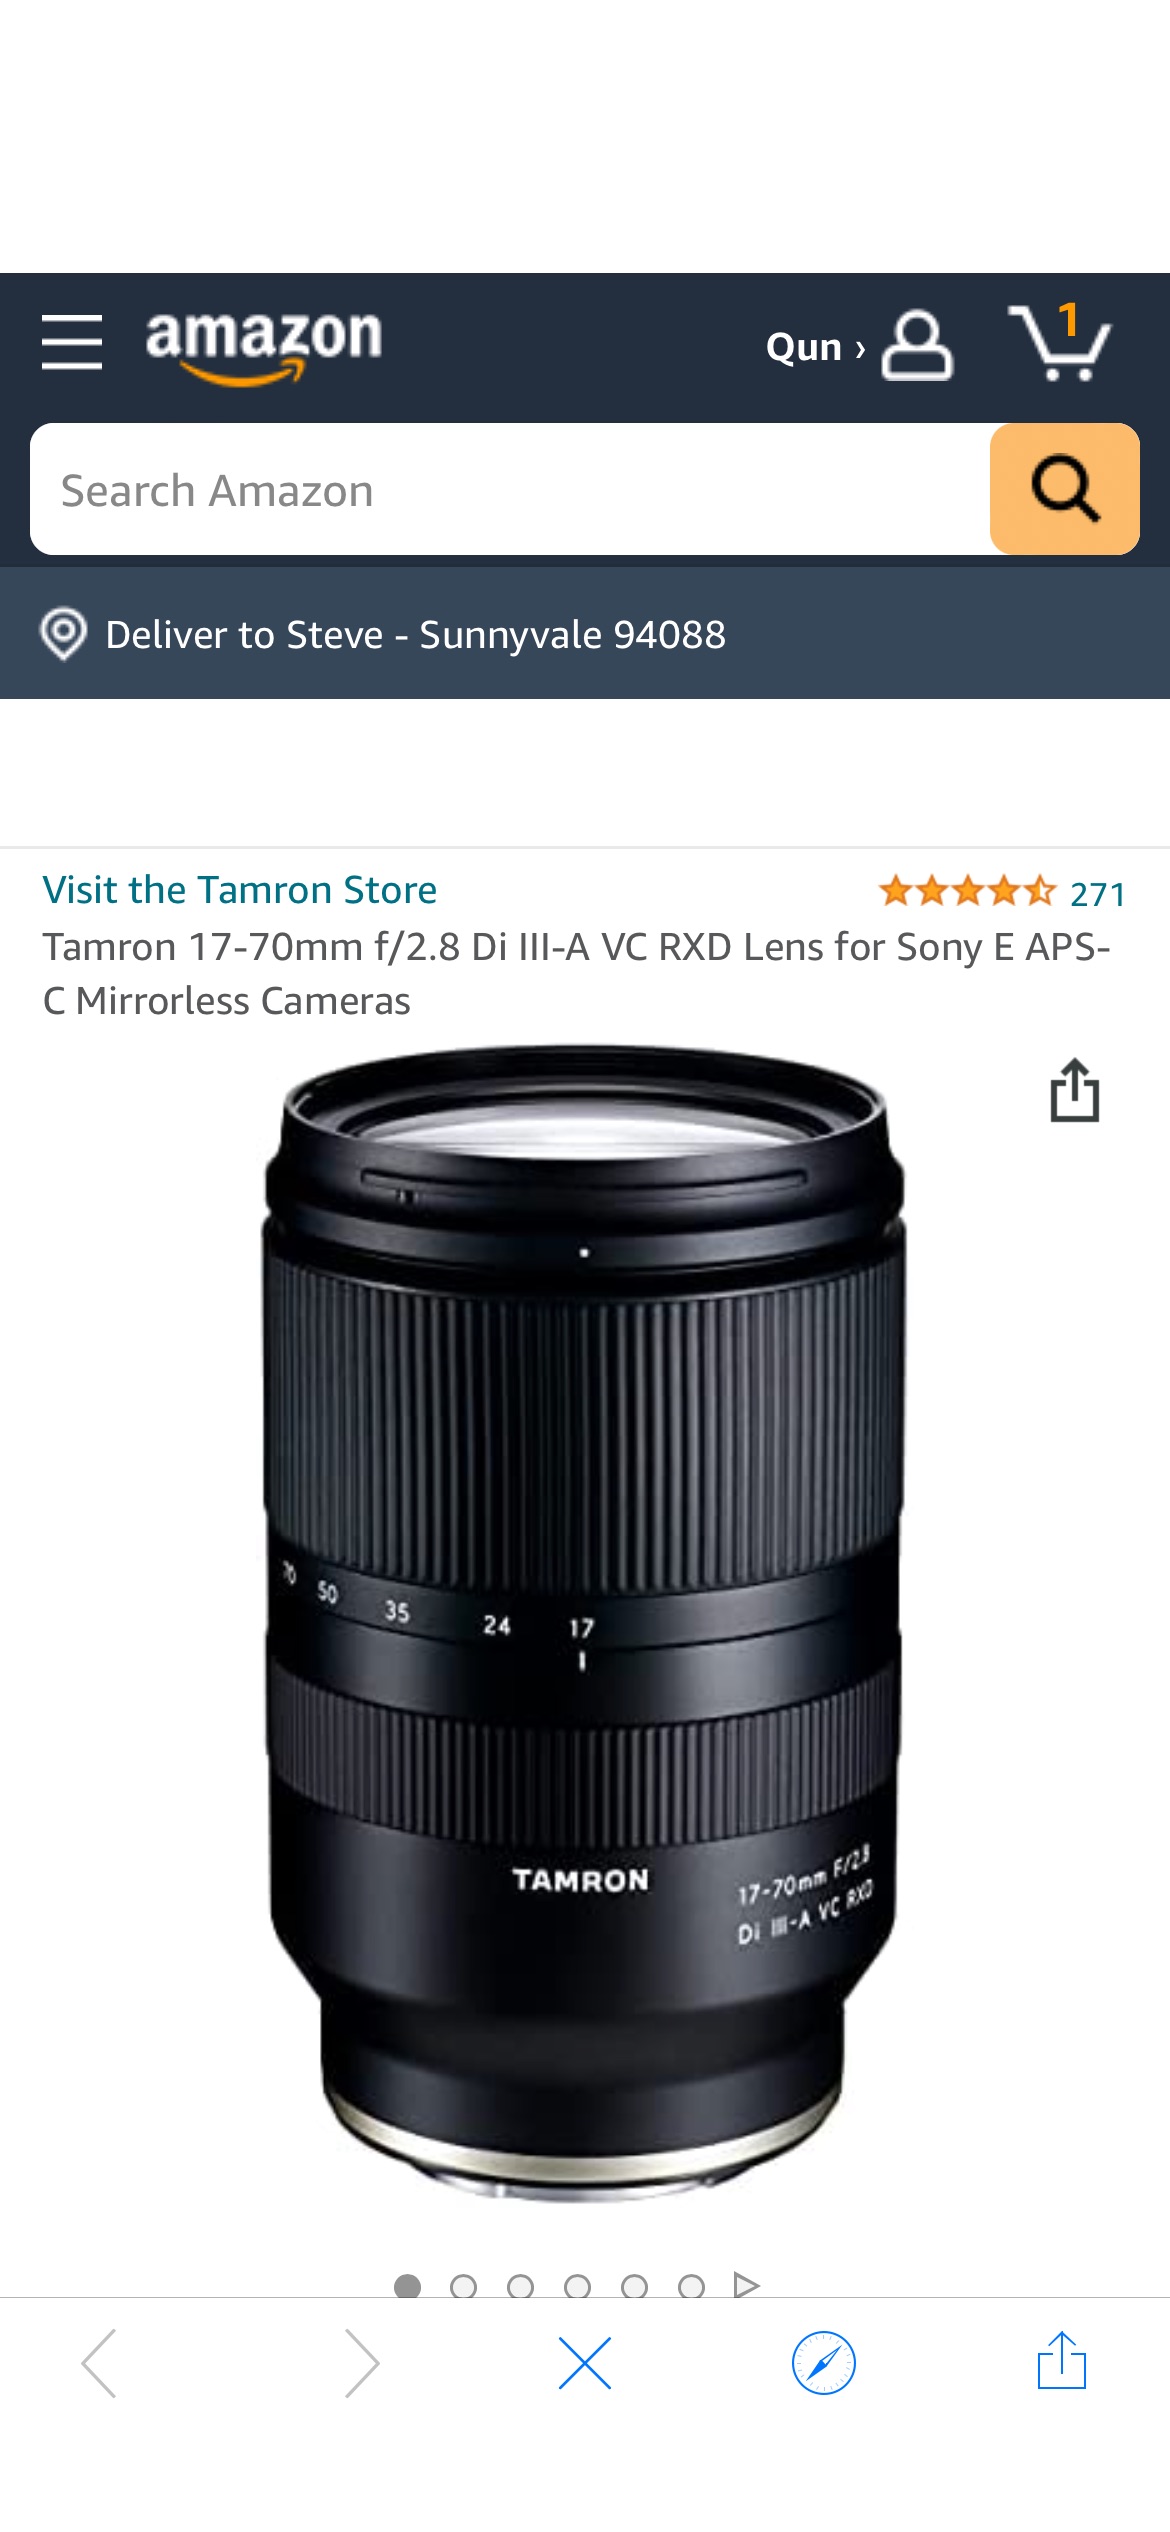 Amazon.com : Tamron 17-70mm f/2.8 Di III-A VC RXD Lens for Sony E APS-C Mirrorless Cameras : Electronics我